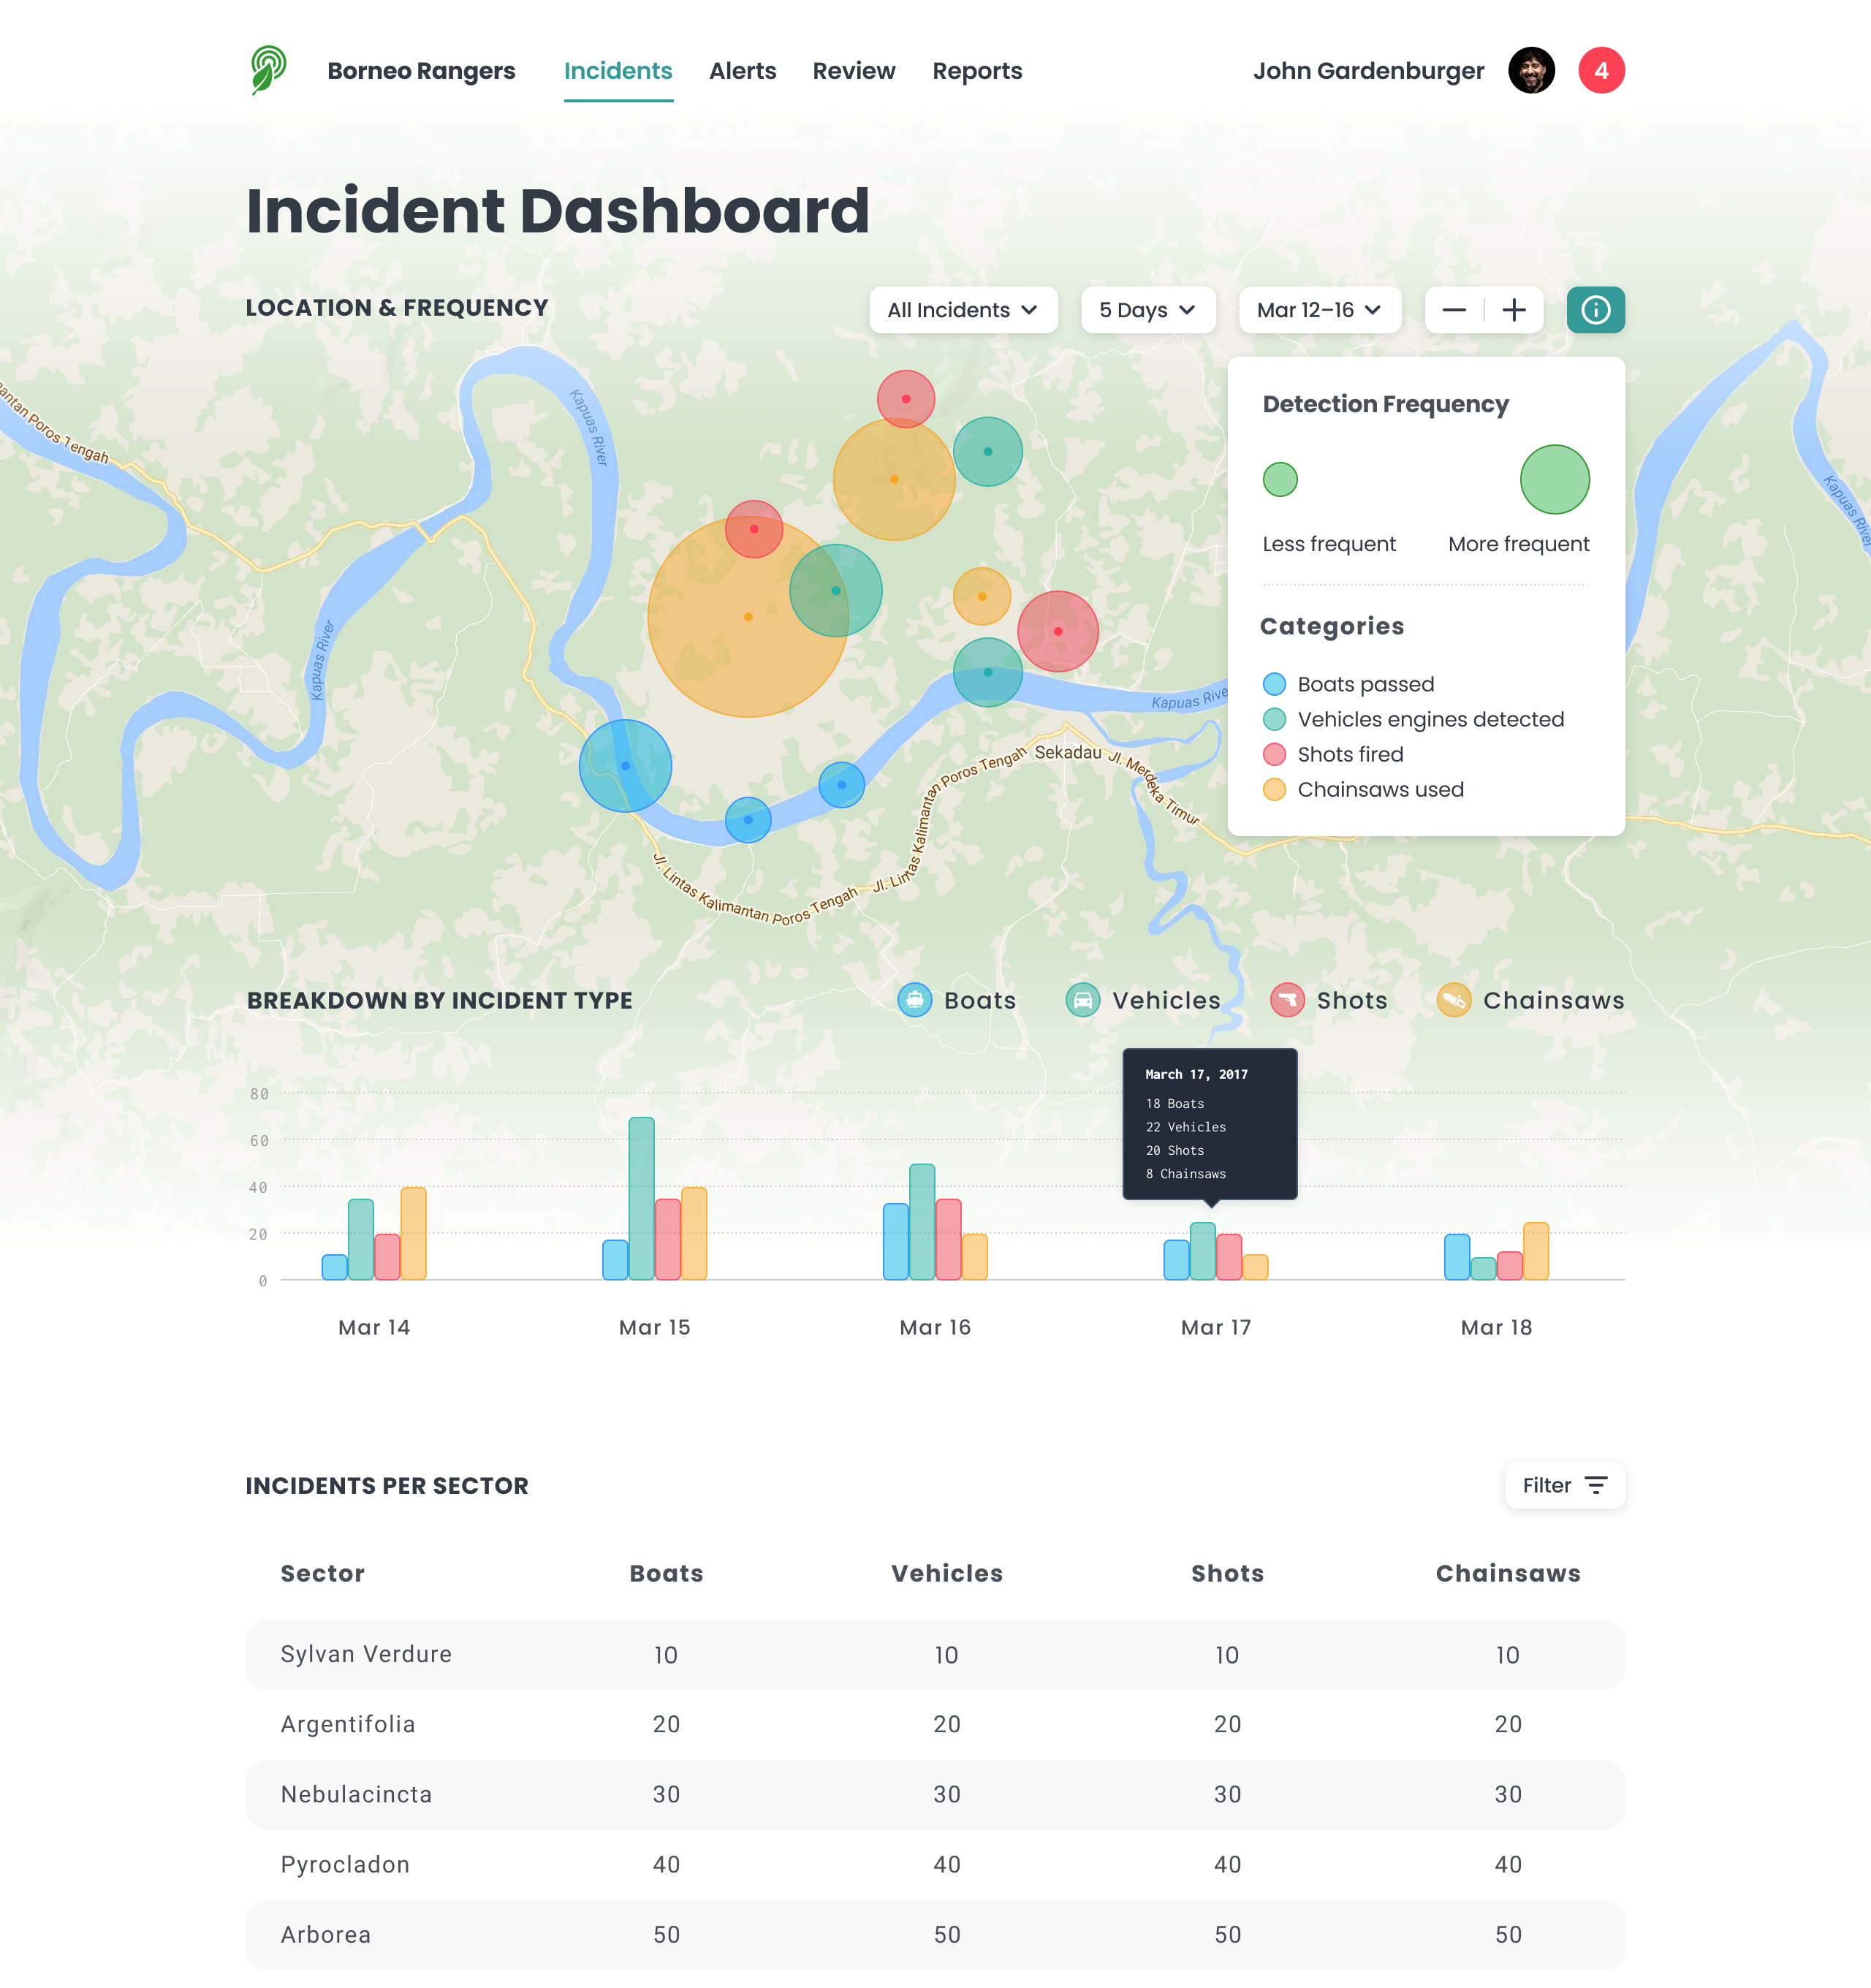 Frame of the RFCx incident dashboard in Figma